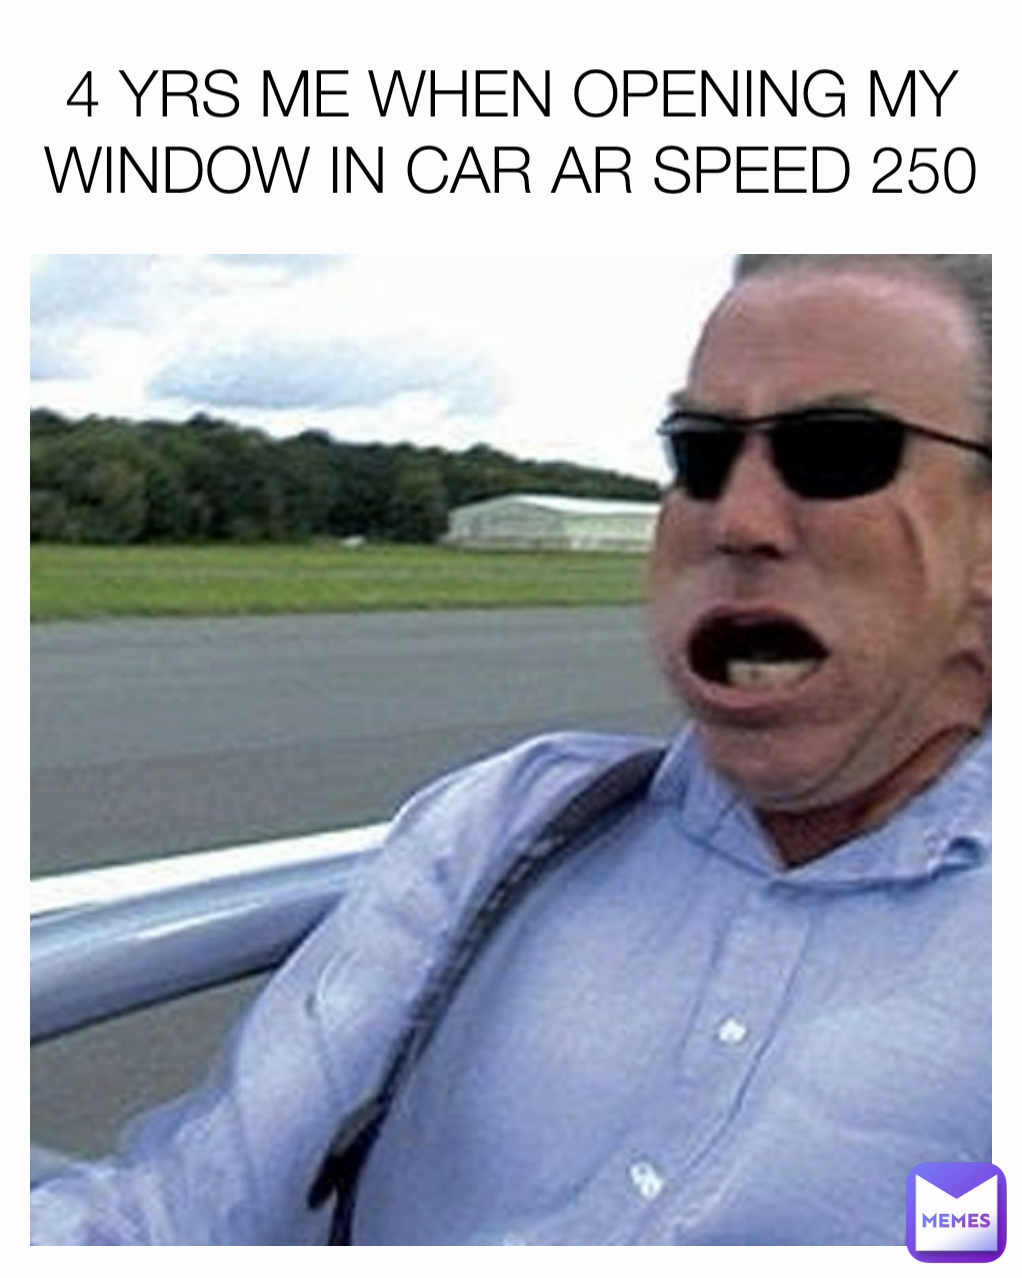 4 YRS ME WHEN OPENING MY WINDOW IN CAR AR SPEED 250